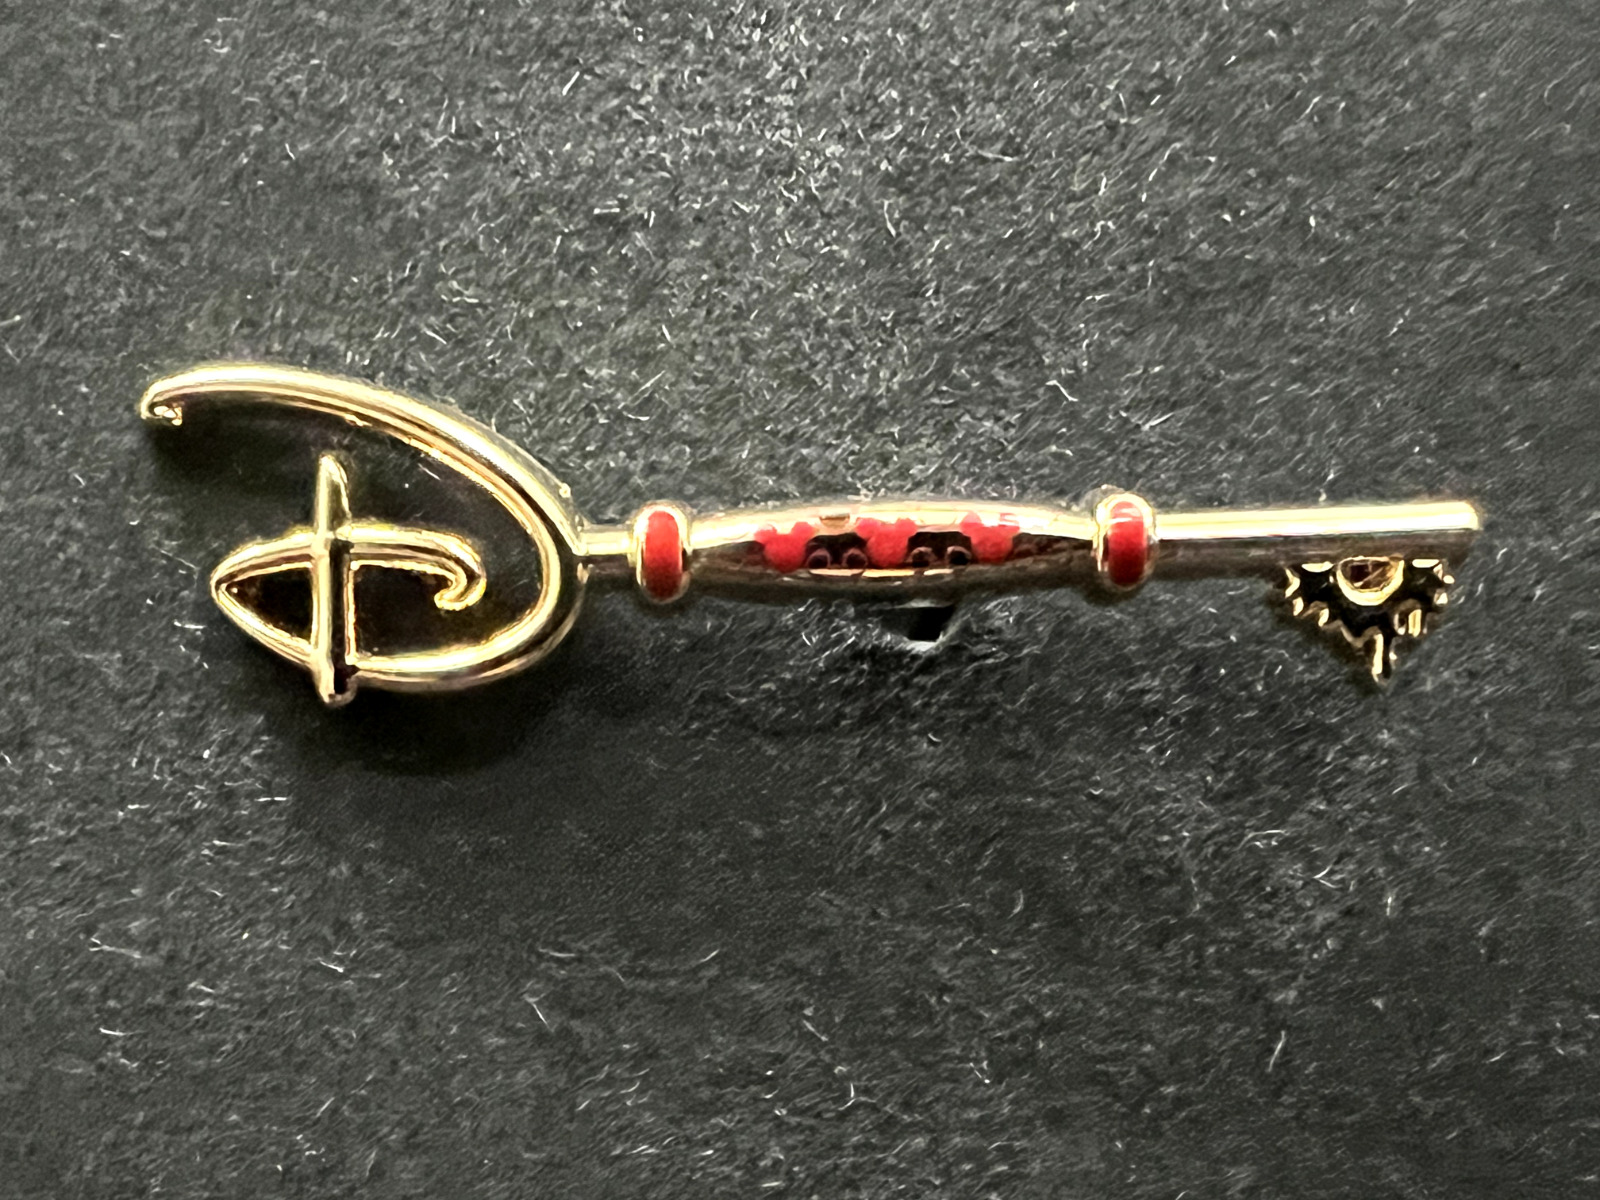 DS - Key - Gold and Red Key - Disney Pin 143095